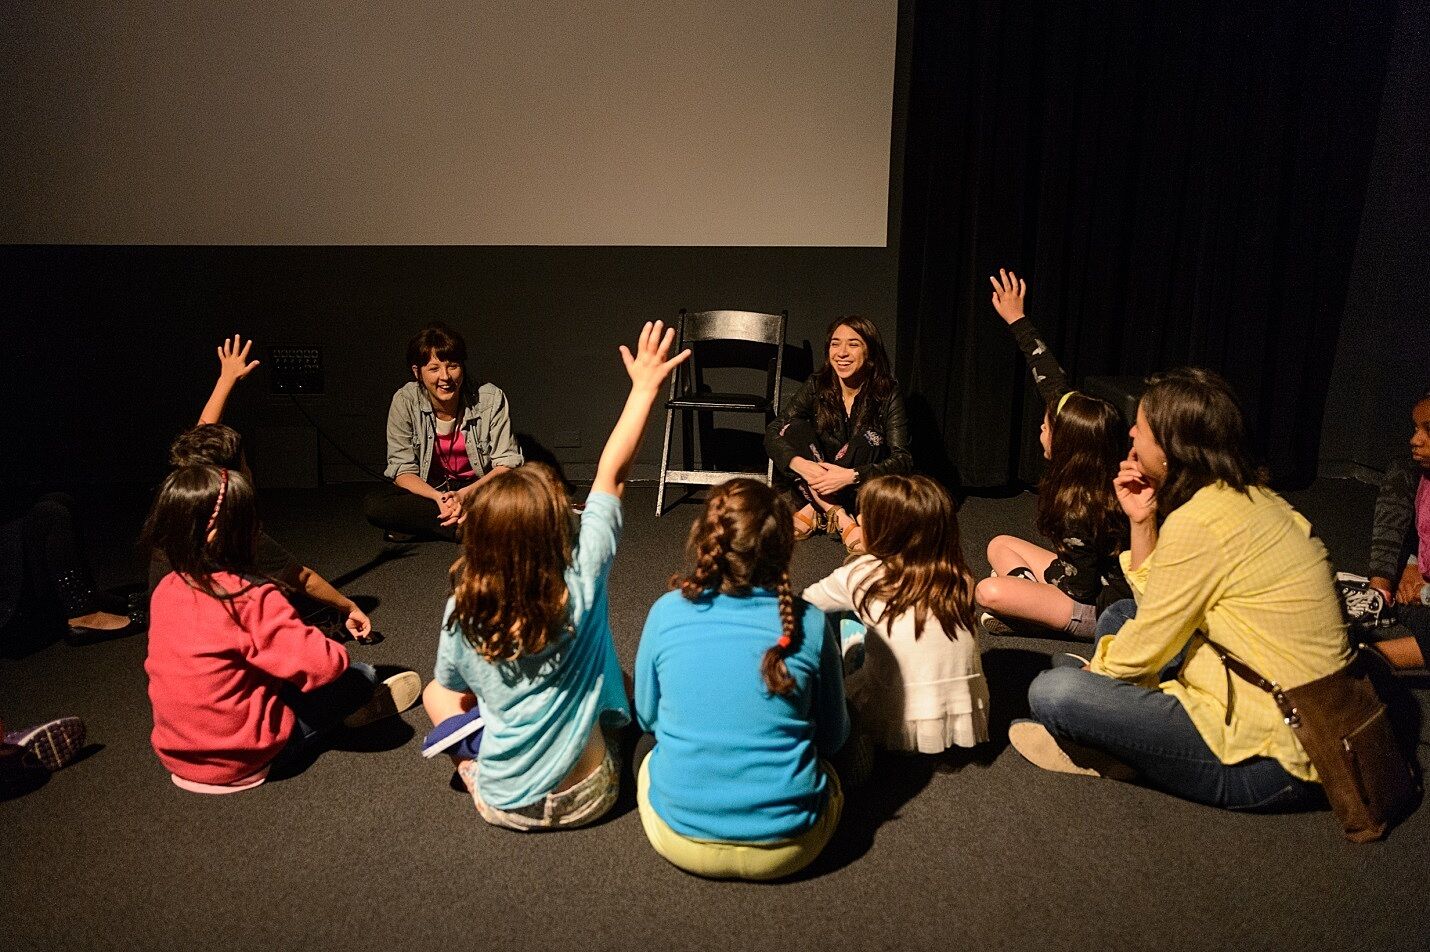 Children and parents raise their hands with questions in a circle around the artist.